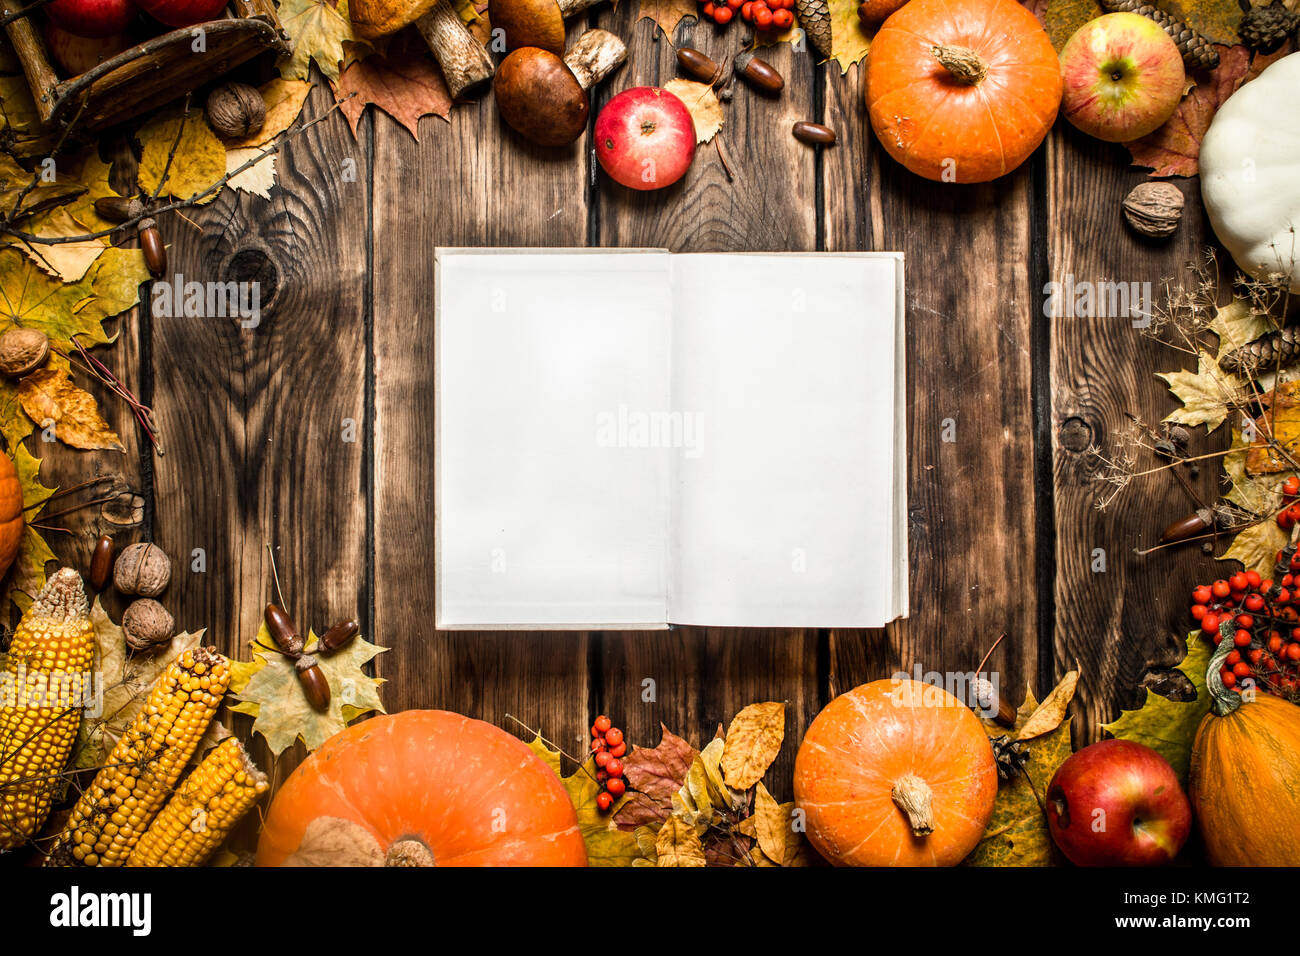 Autumn food. Old book with autumn fruits and vegetables. On wooden background. Stock Photo